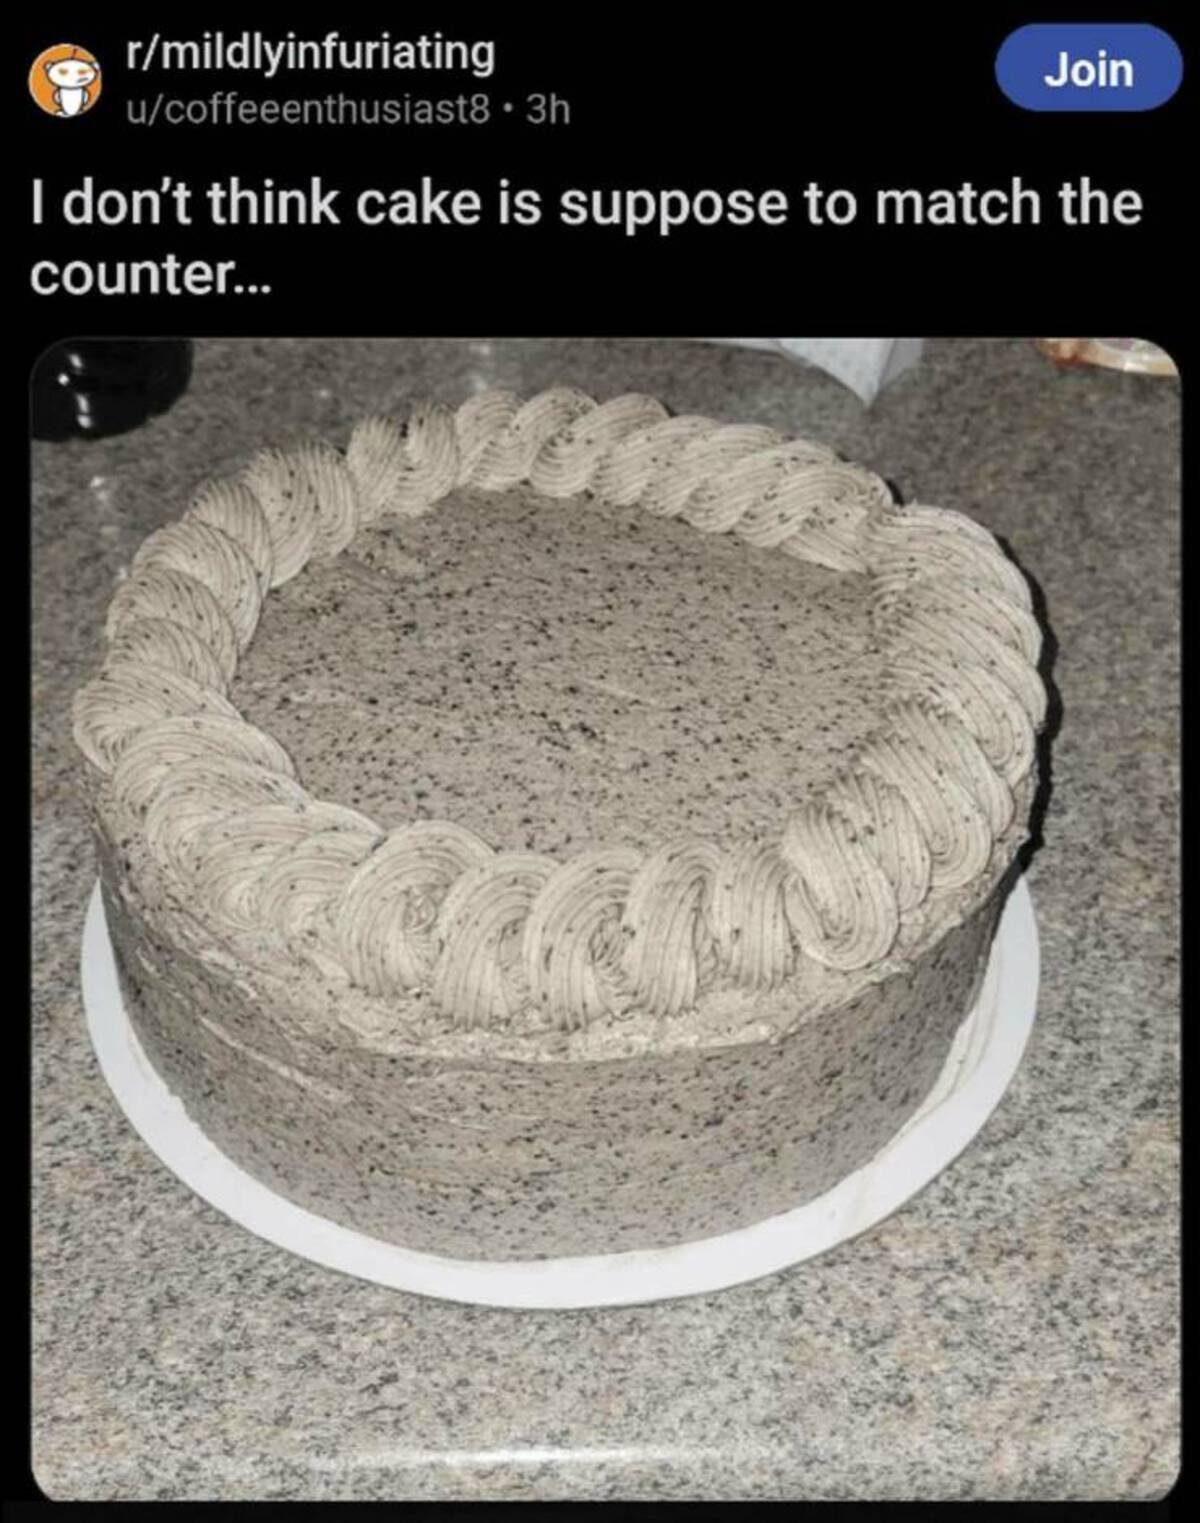 Cake - rmildlyinfuriating ucoffeeenthusiast8.3h Join I don't think cake is suppose to match the counter...